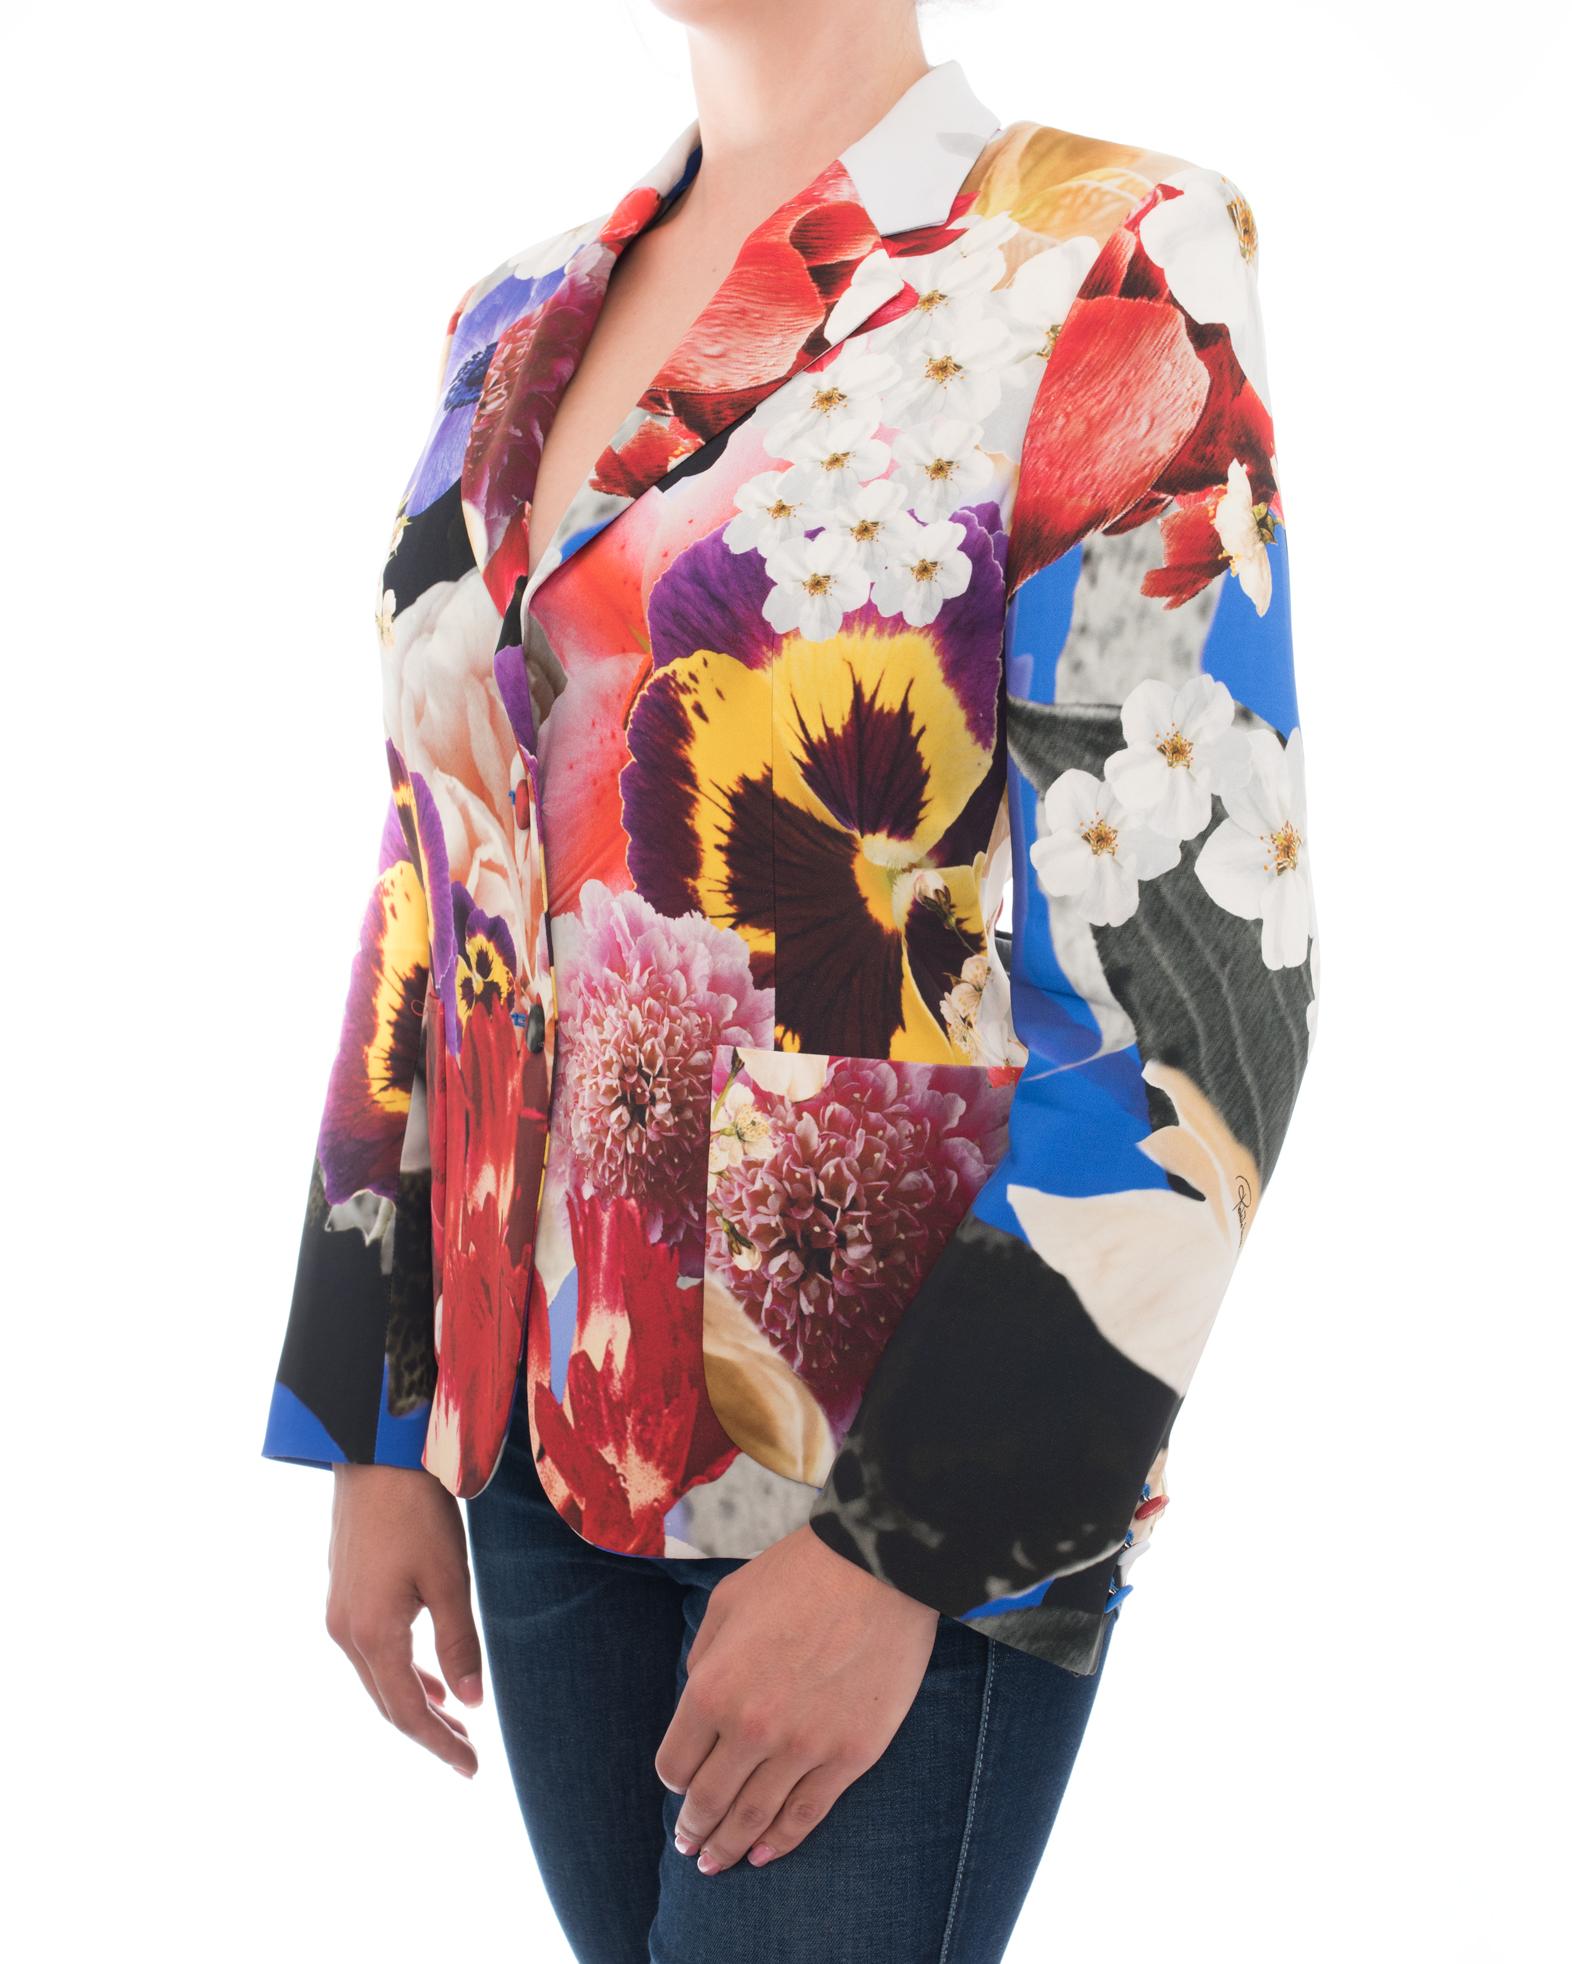 Roberto Cavalli Red, Blue, Yellow Floral Photoprint Blazer Jacket.  Original retail price 1509 British pounds. Signature logo in print, fastens with 2 covered buttons at front, contrasting cobalt blue silk lining.  Floral photoprint design.  Marked